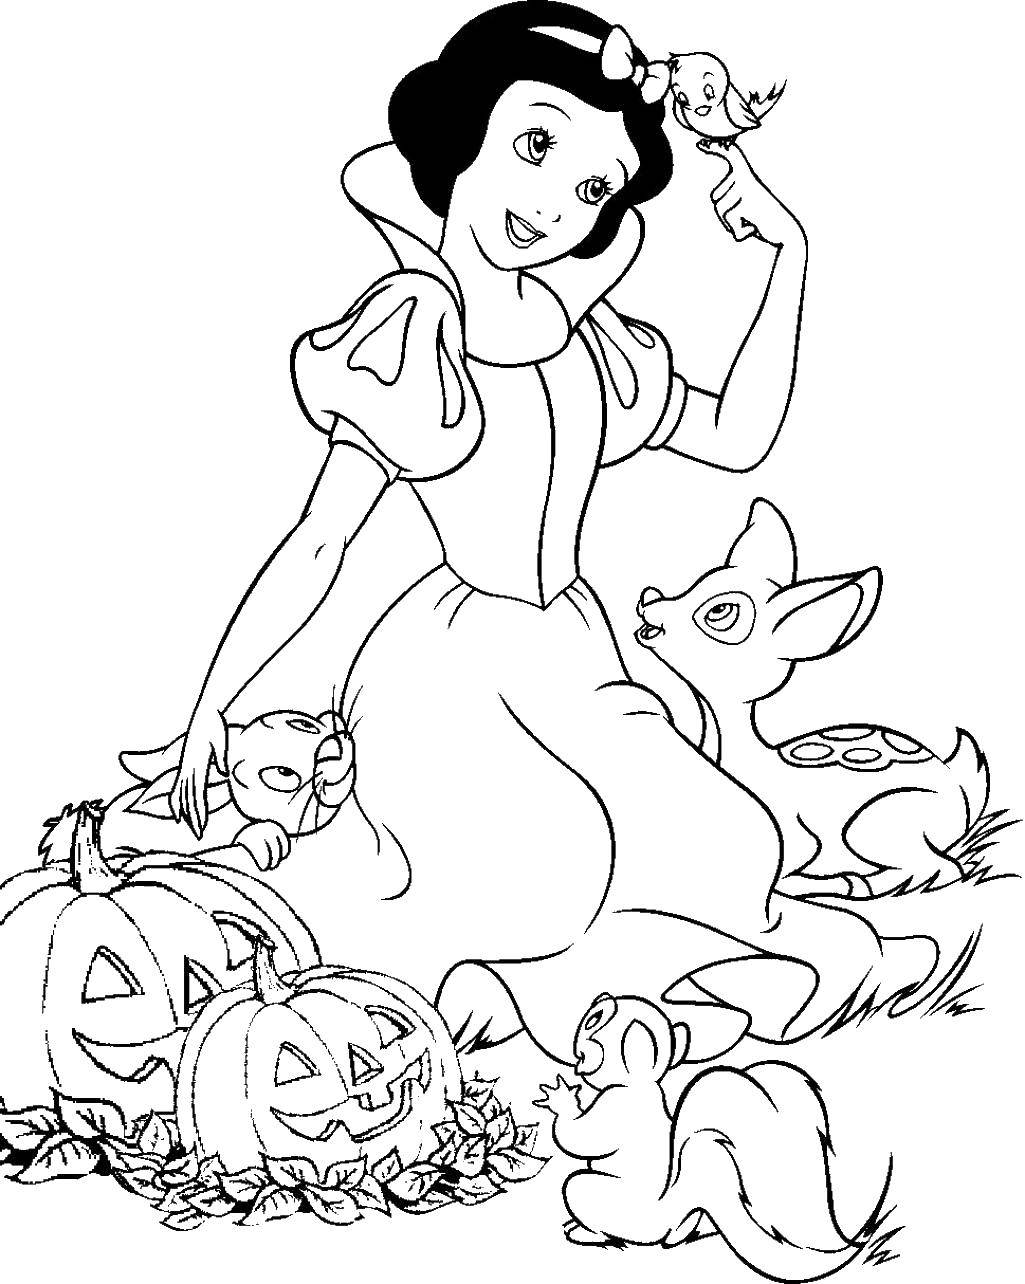 Coloring Snow white on Halloween. Category Disney coloring pages. Tags:  Disney, Snow White.